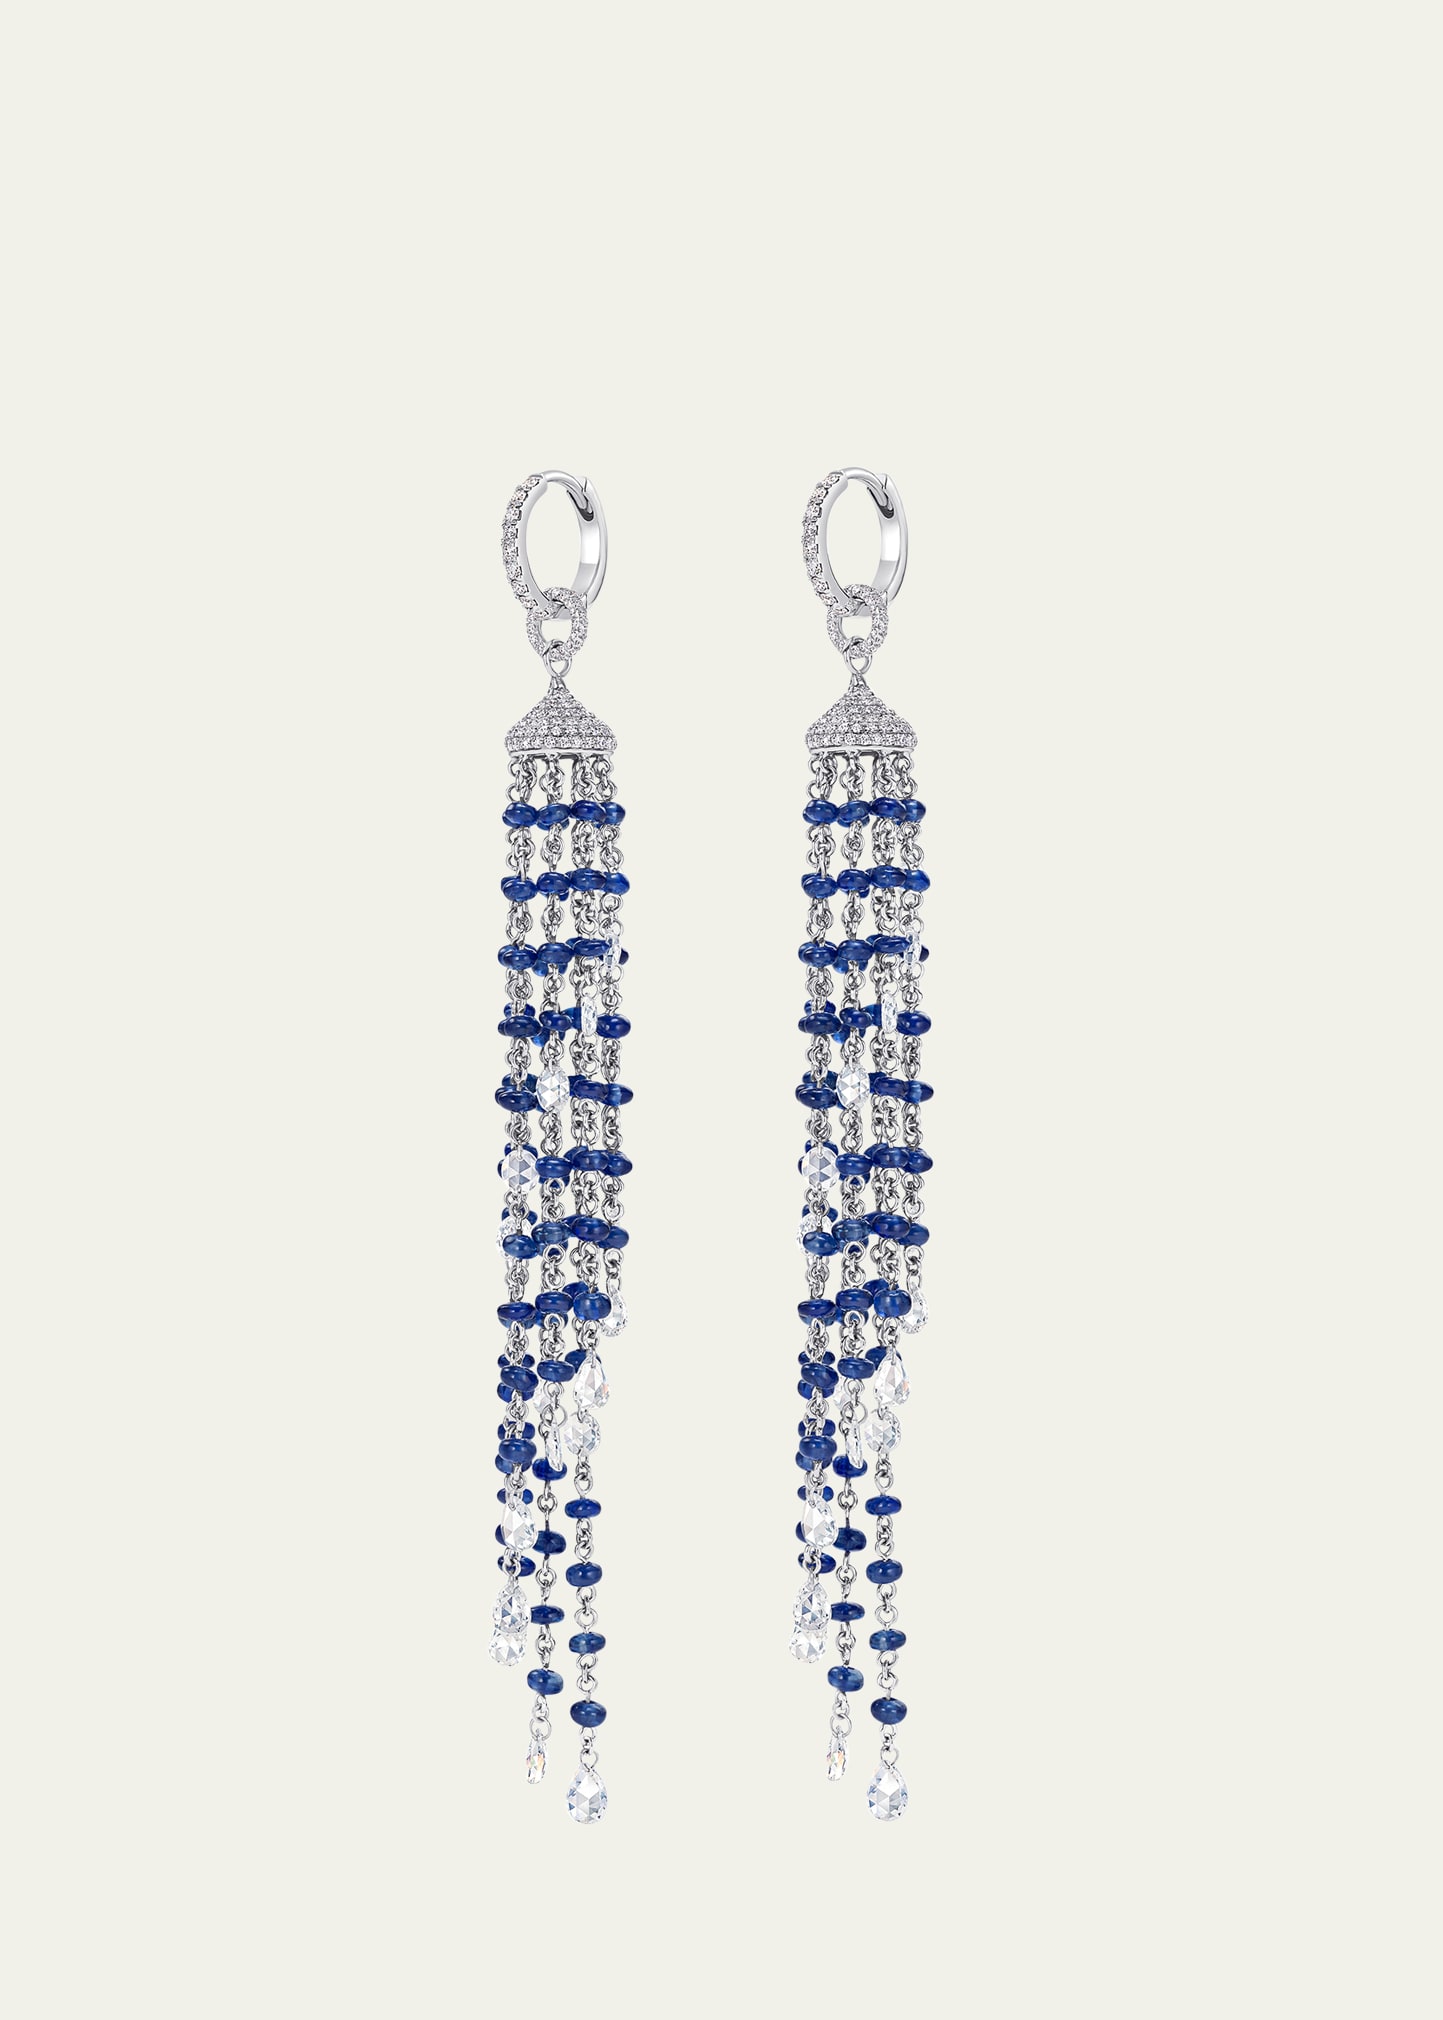 18K White Gold Spiral Tassel Earrings with Natural Sapphire Beads and Diamonds